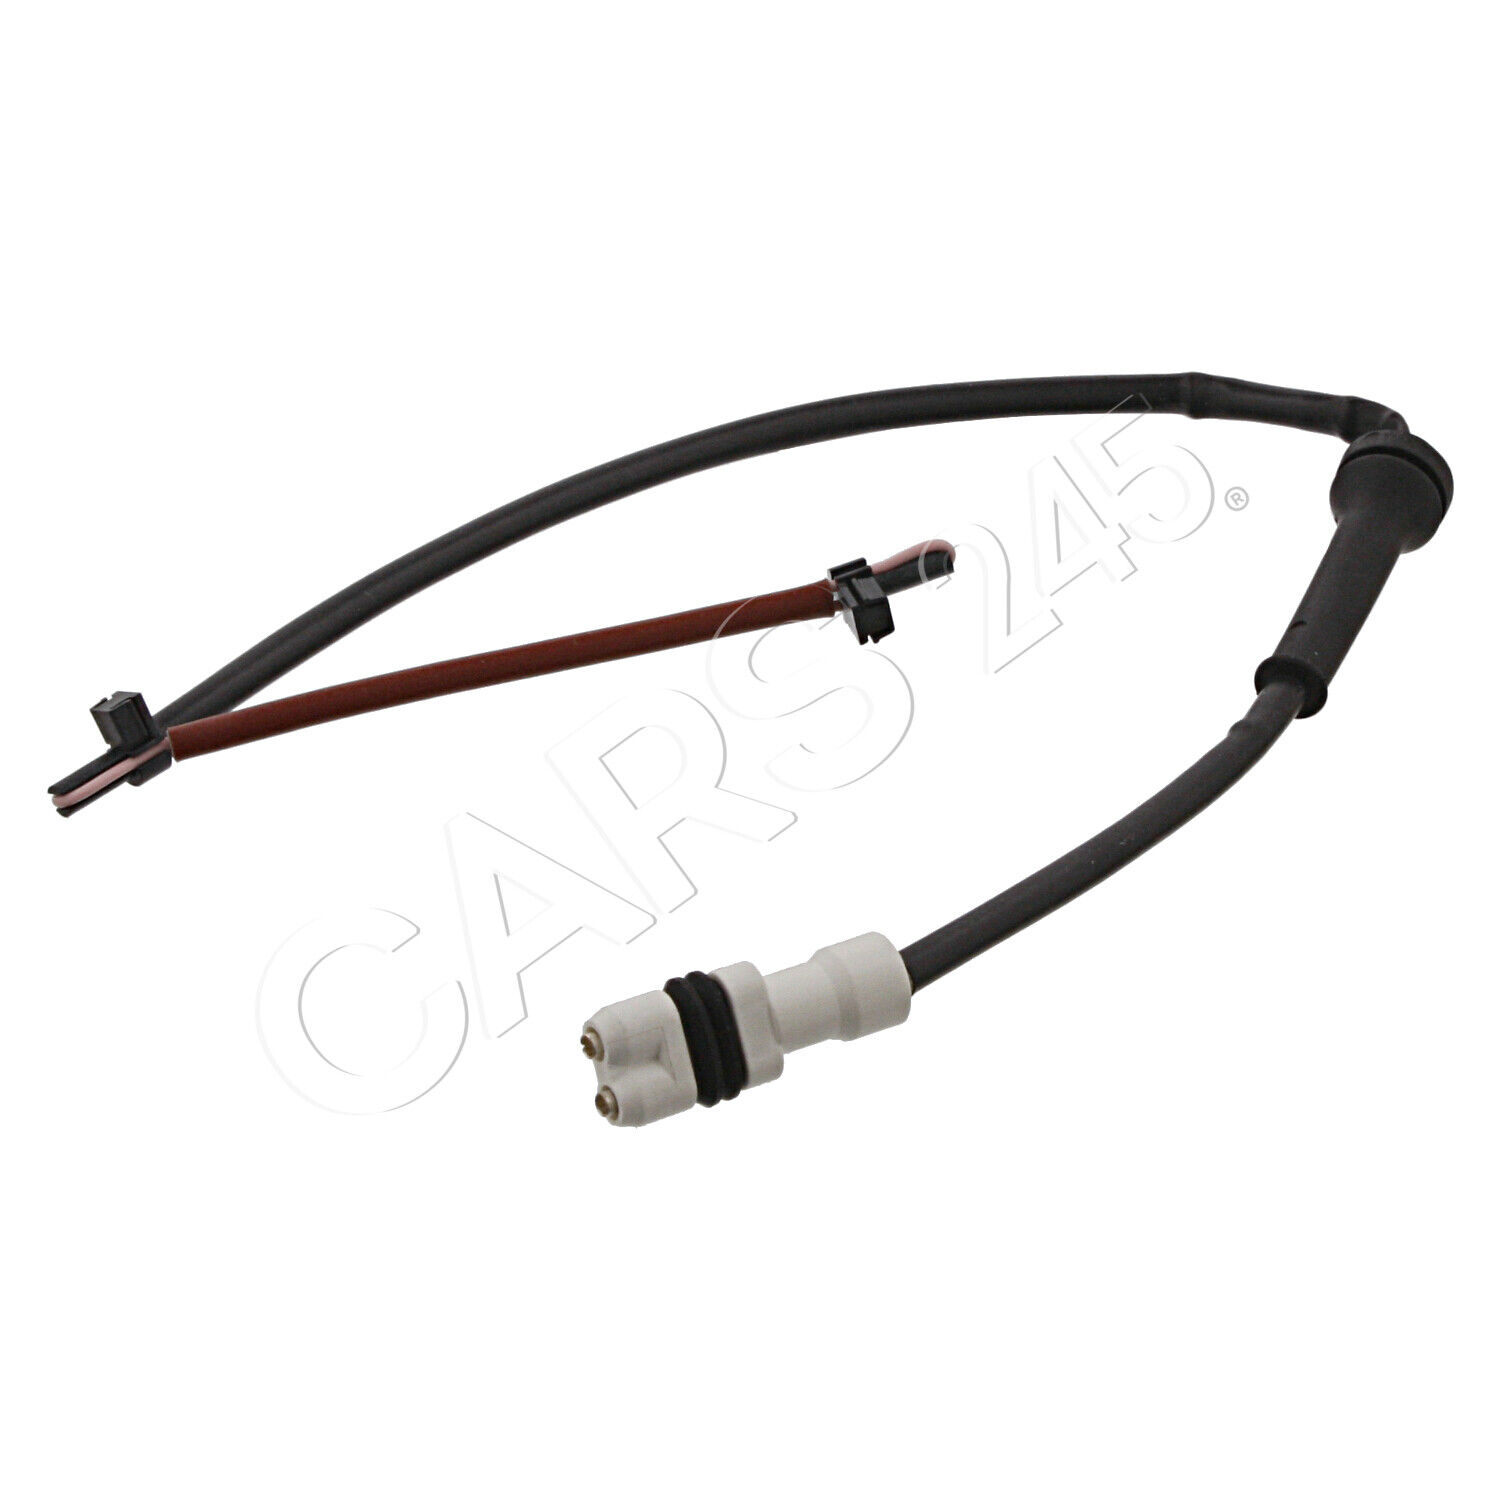 SWAG Rear Axle Brake Pad Wear 35% OFF Boxster Sensor Cayman Fits Free shipping / New PORSCHE